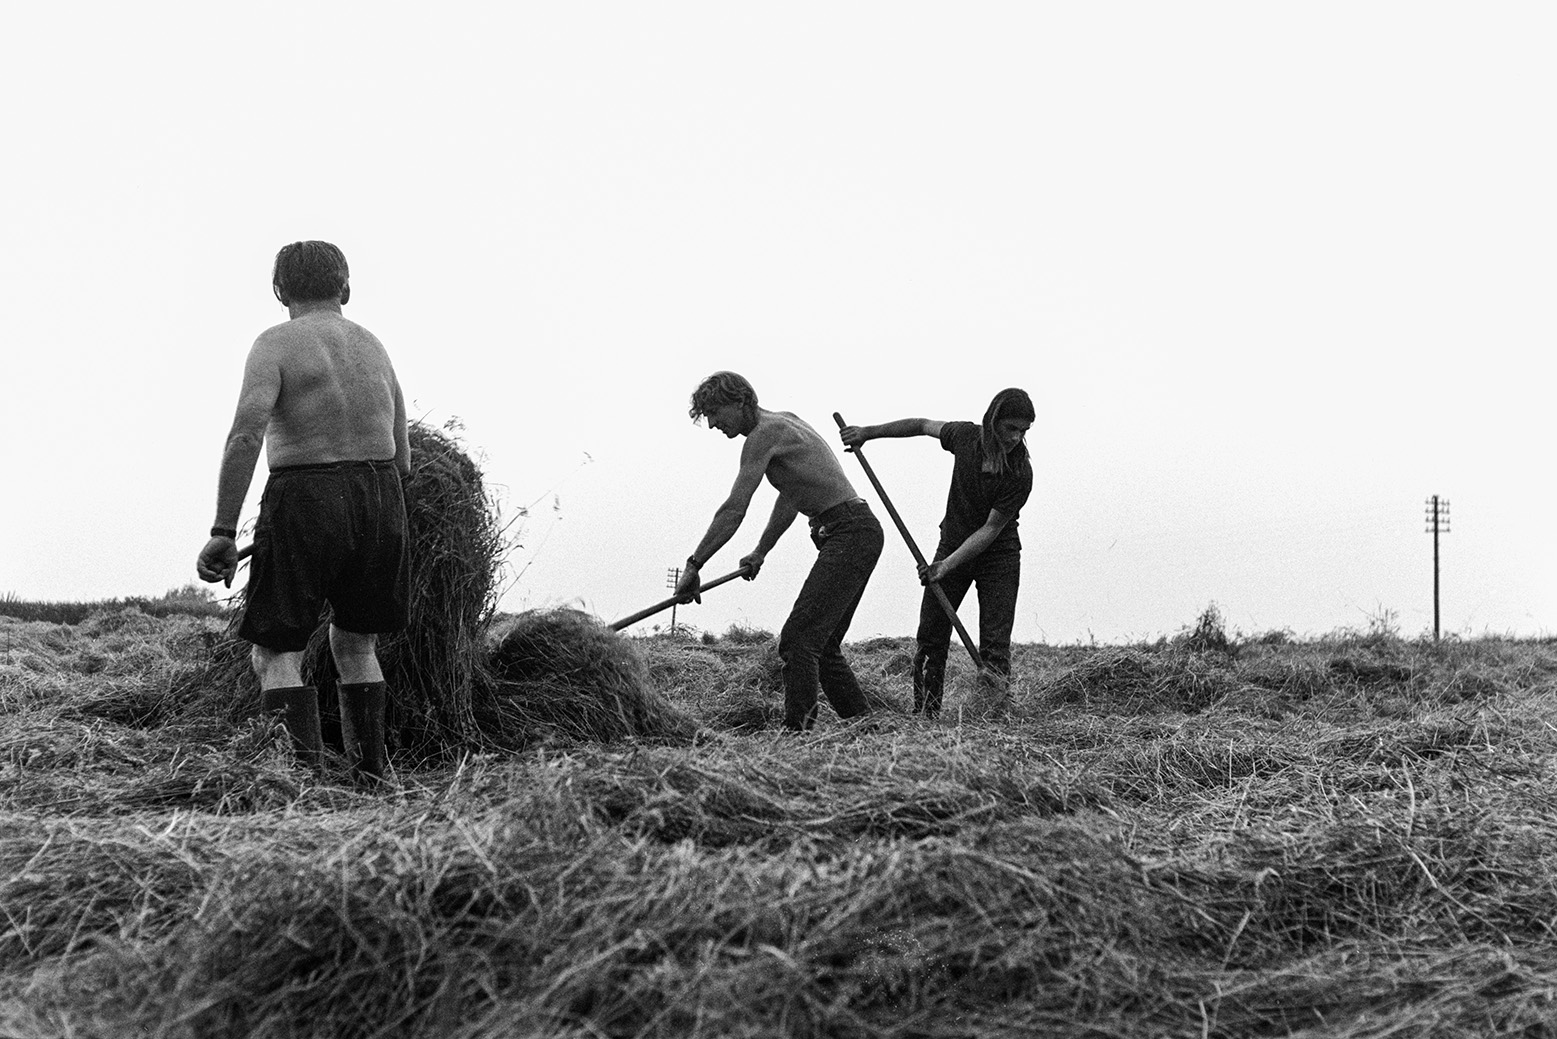 Derek Bright, on the right, Ivor Bourne, in the centre, and another man using forks to turn hay to dry it out in a field at Mill Road Farm, Beaford. The farm was also known as Jeffrys.